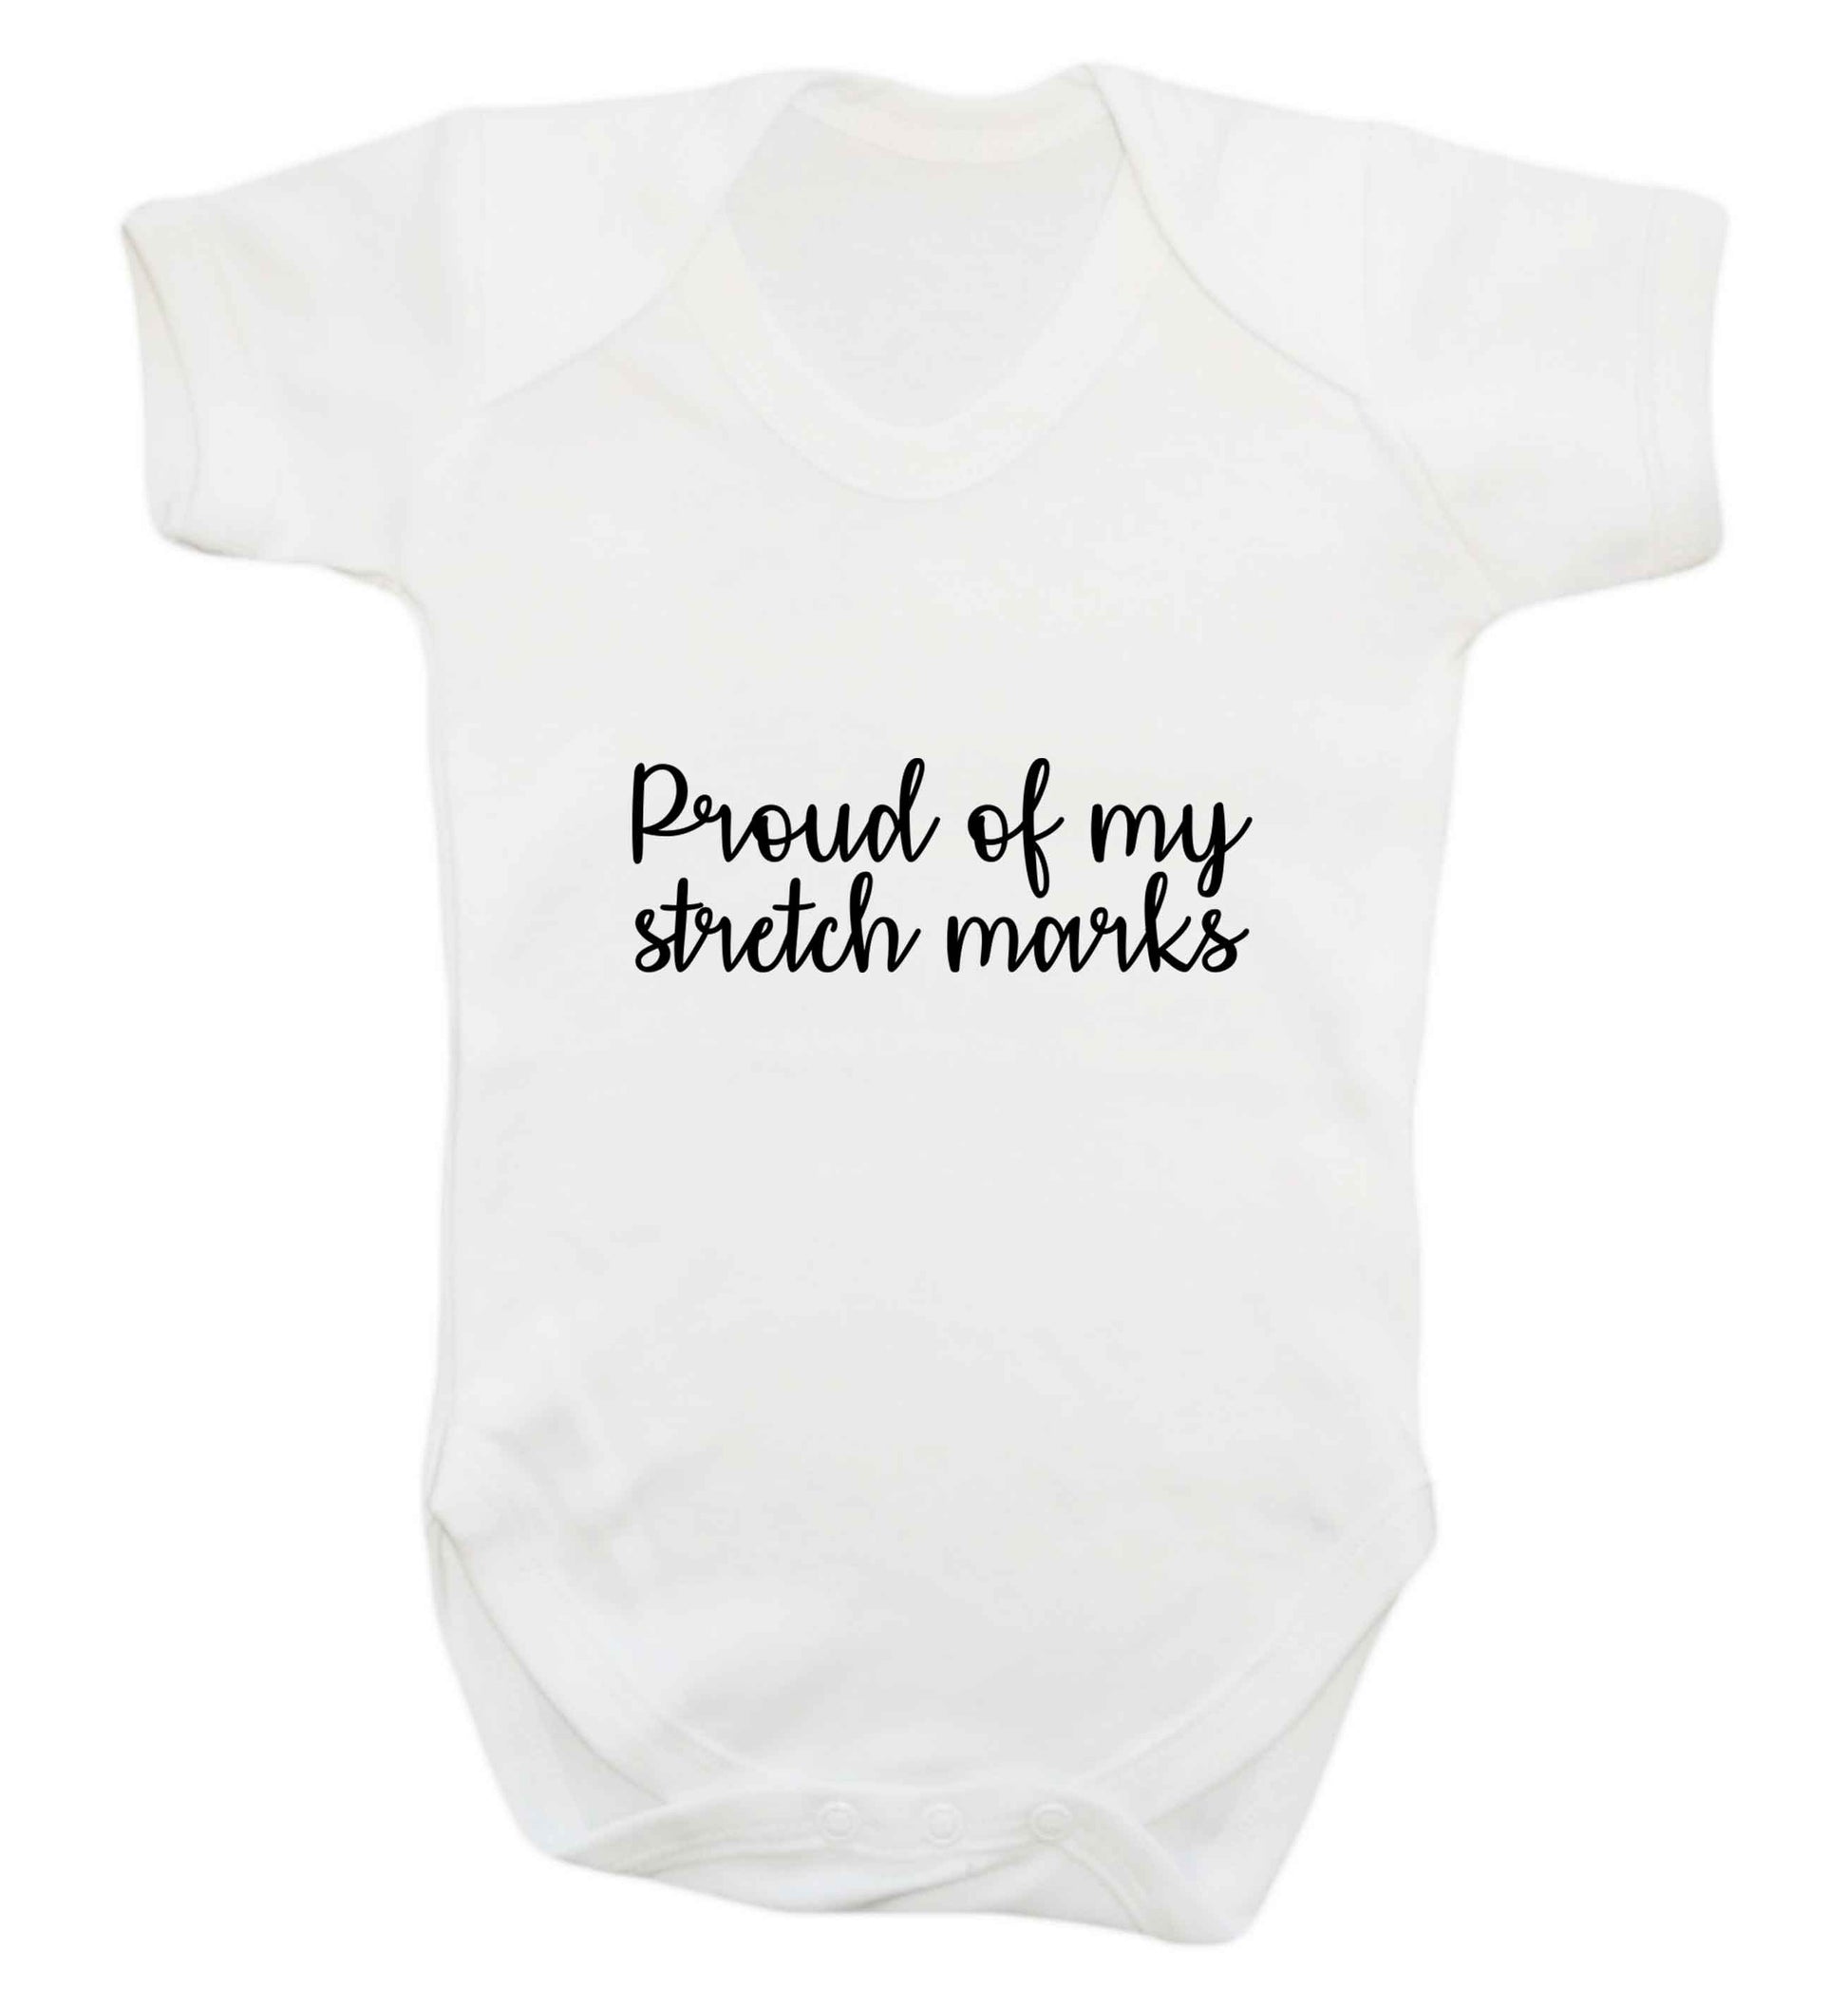 Proud of my stretch marks baby vest white 18-24 months